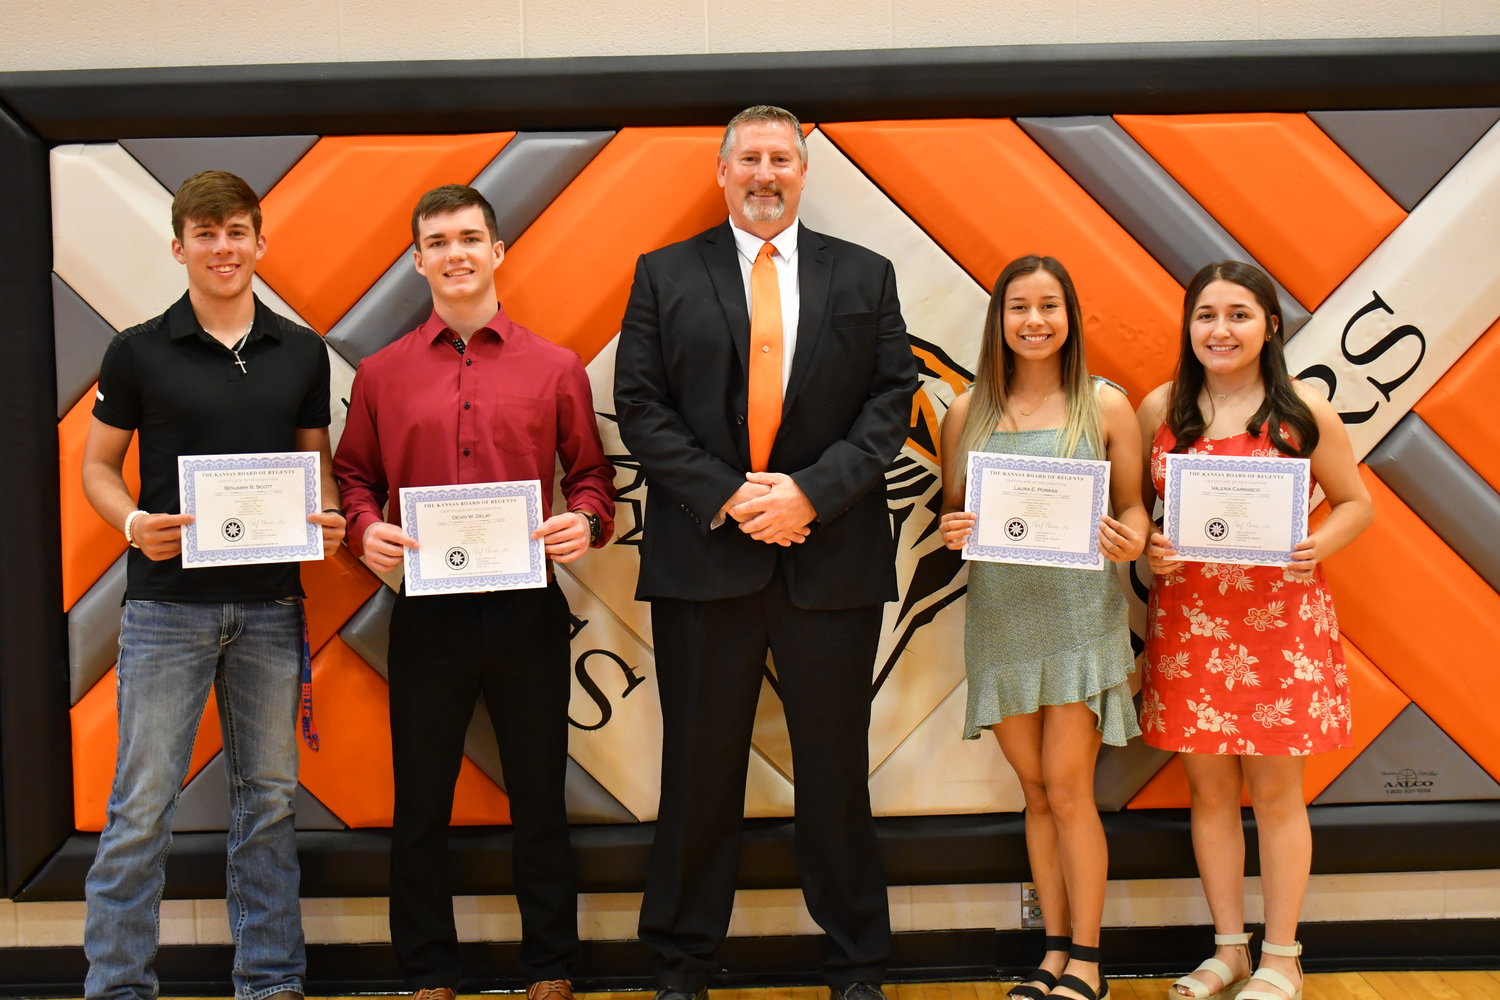 Senior Awards — Ben Scott, Devin Delay, Laura Porras, and Valeria Carrasco were given the Kansas State Board Curriculum Completers Scholarship from Mark Paul on Friday, May 13, 2022.